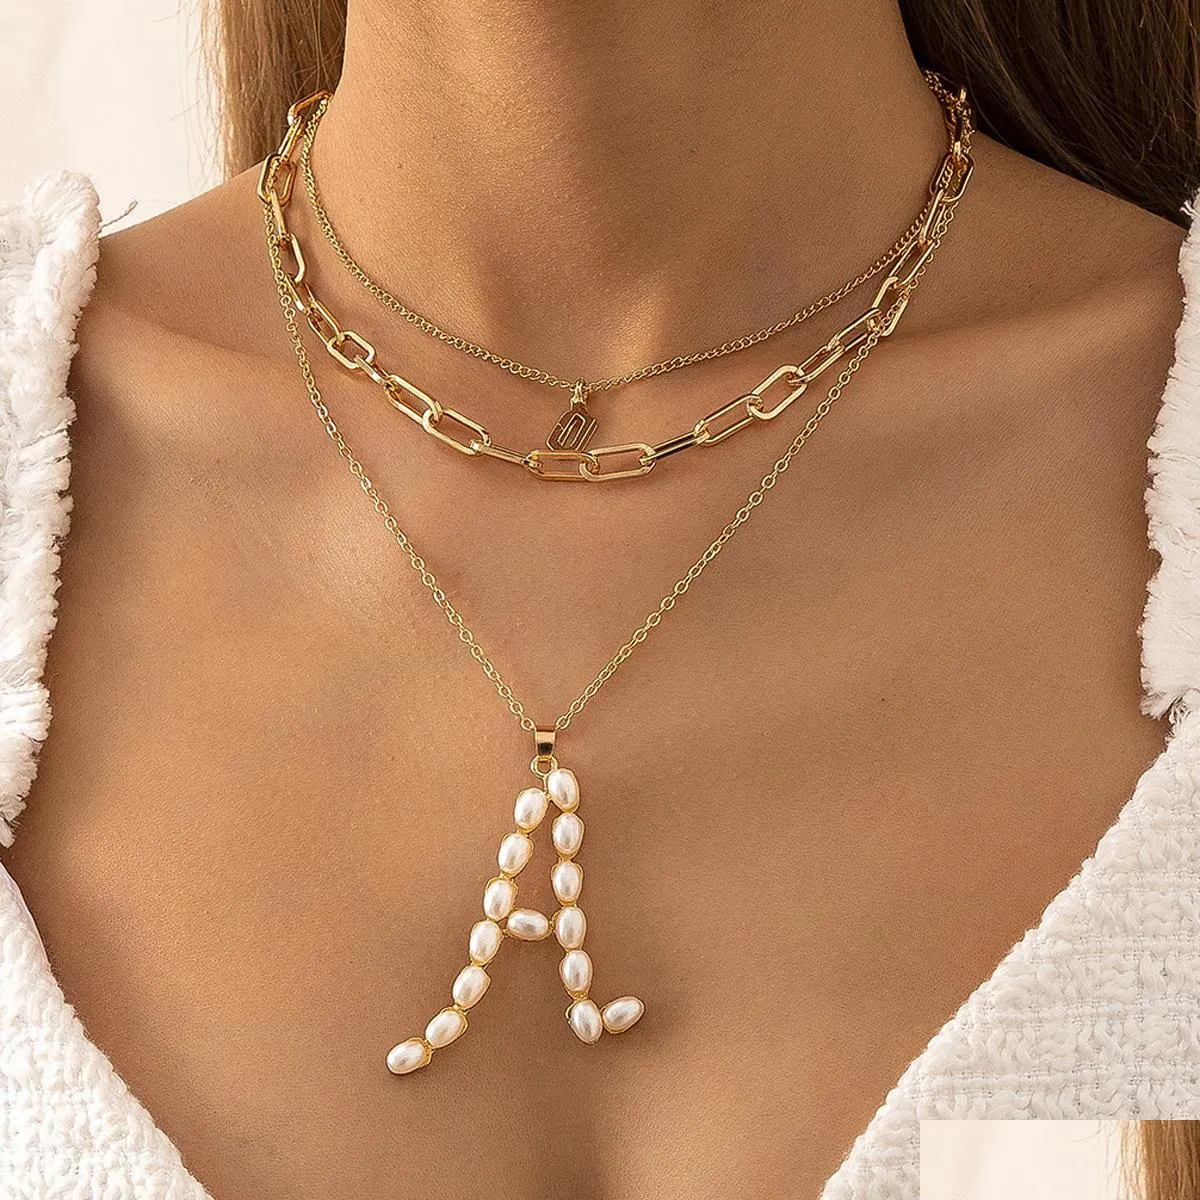 fashion jewelry multi layer necklace geometric chain letter a pendant choker necklaces